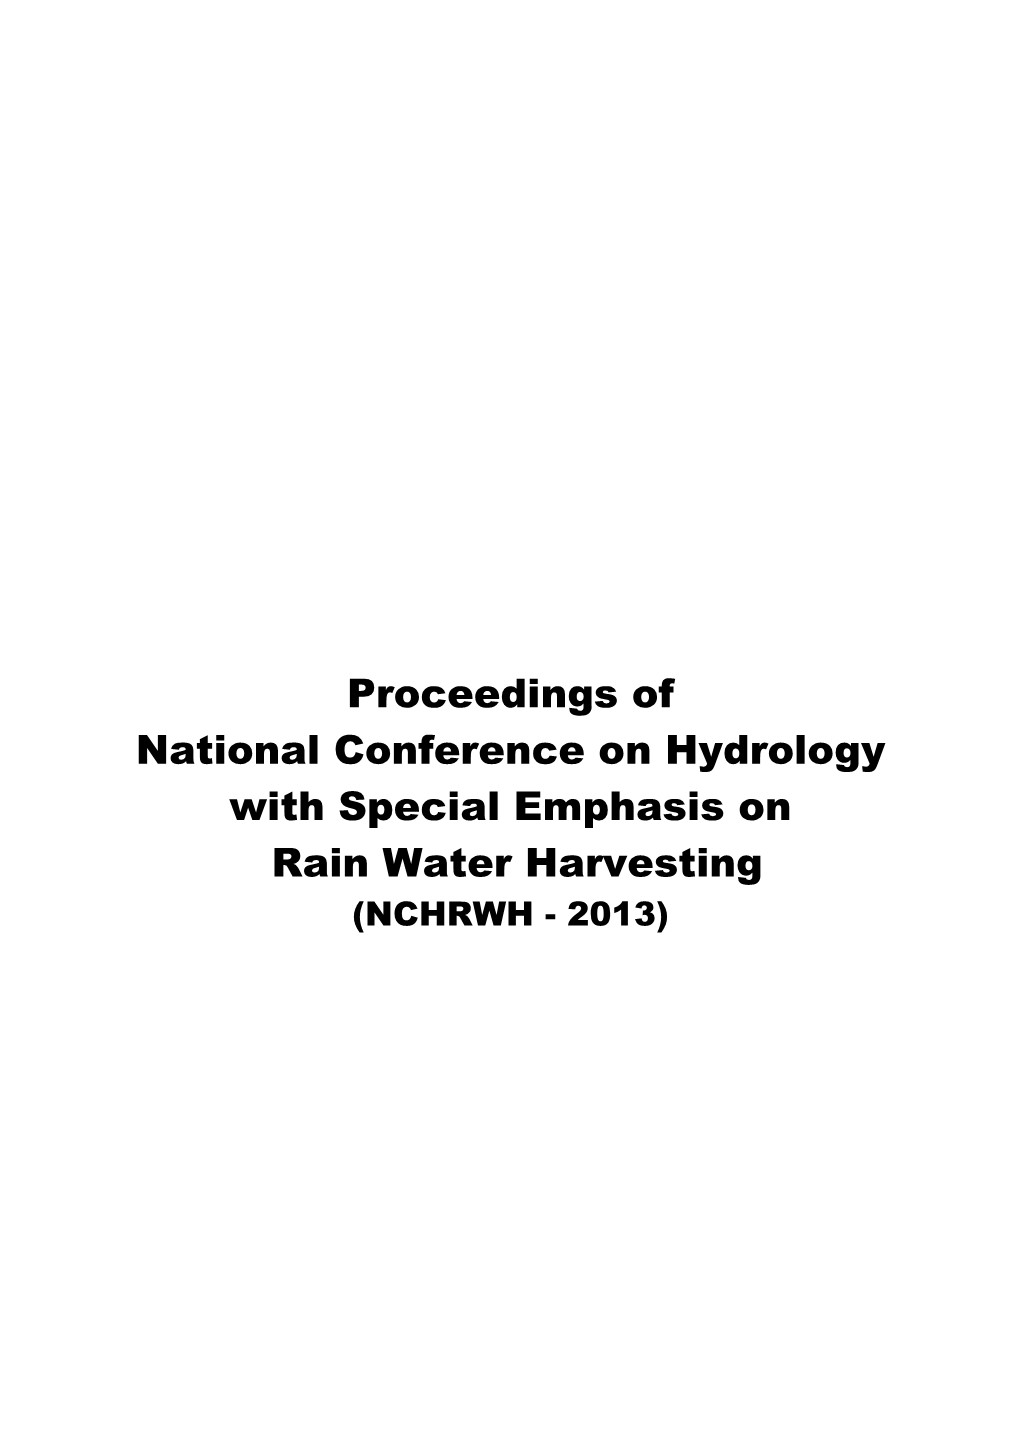 Proceedings of National Conference on Hydrology with Special Emphasis on Rain Water Harvesting (NCHRWH - 2013)